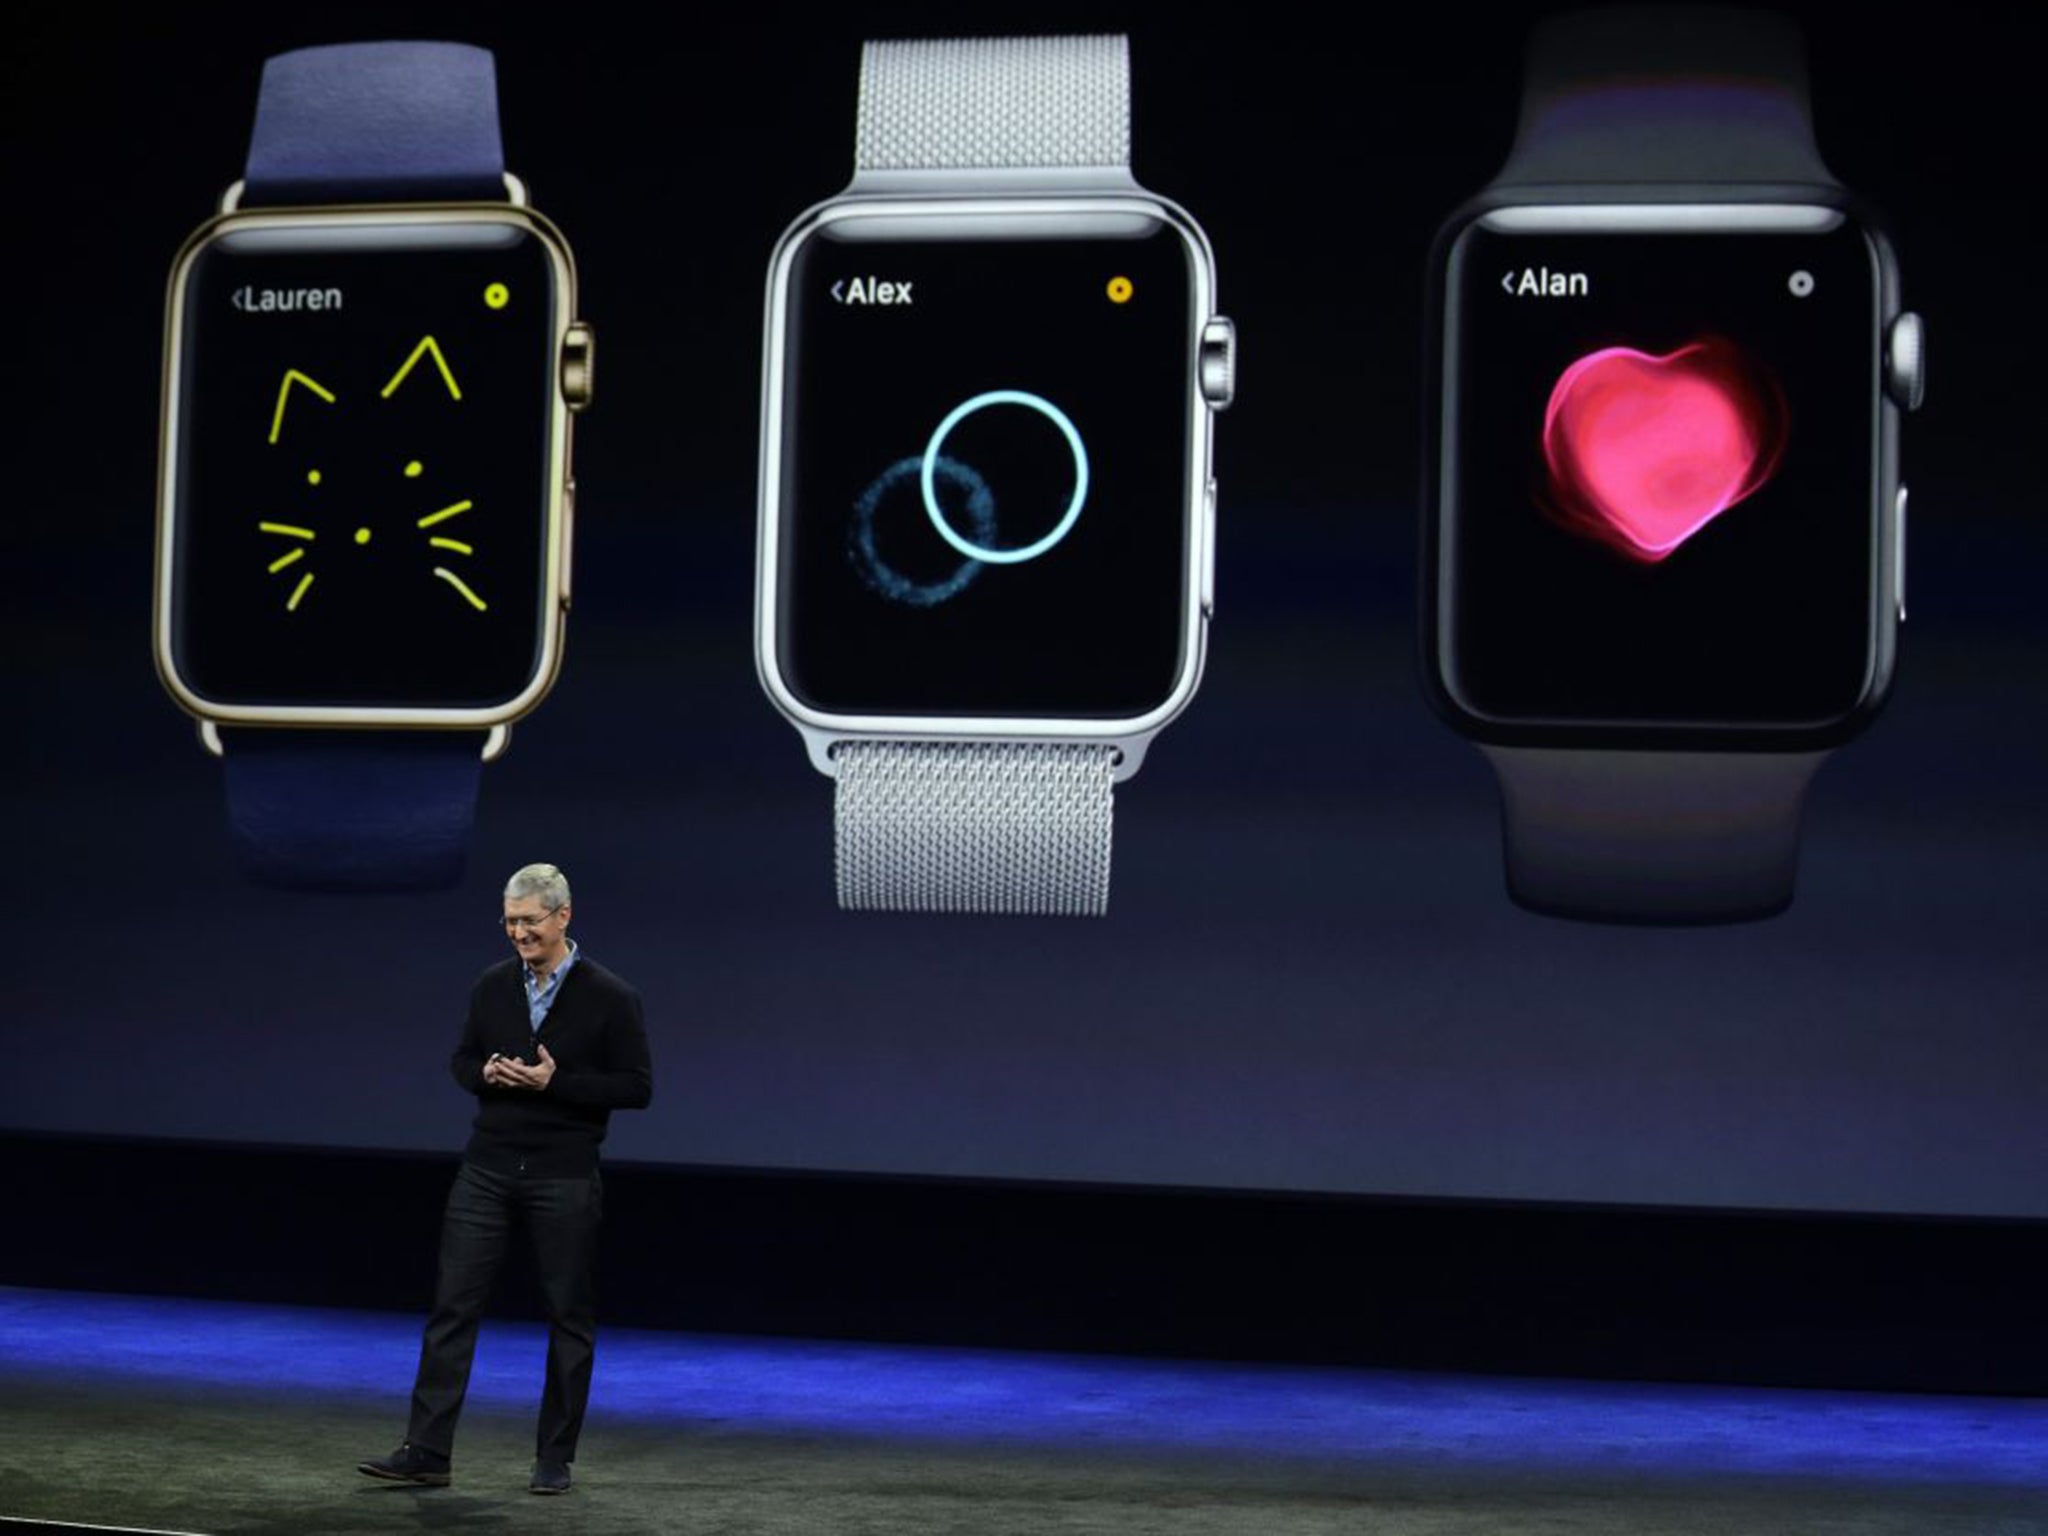 The Apple Watch will also be available in gold - at a cost of £12,000